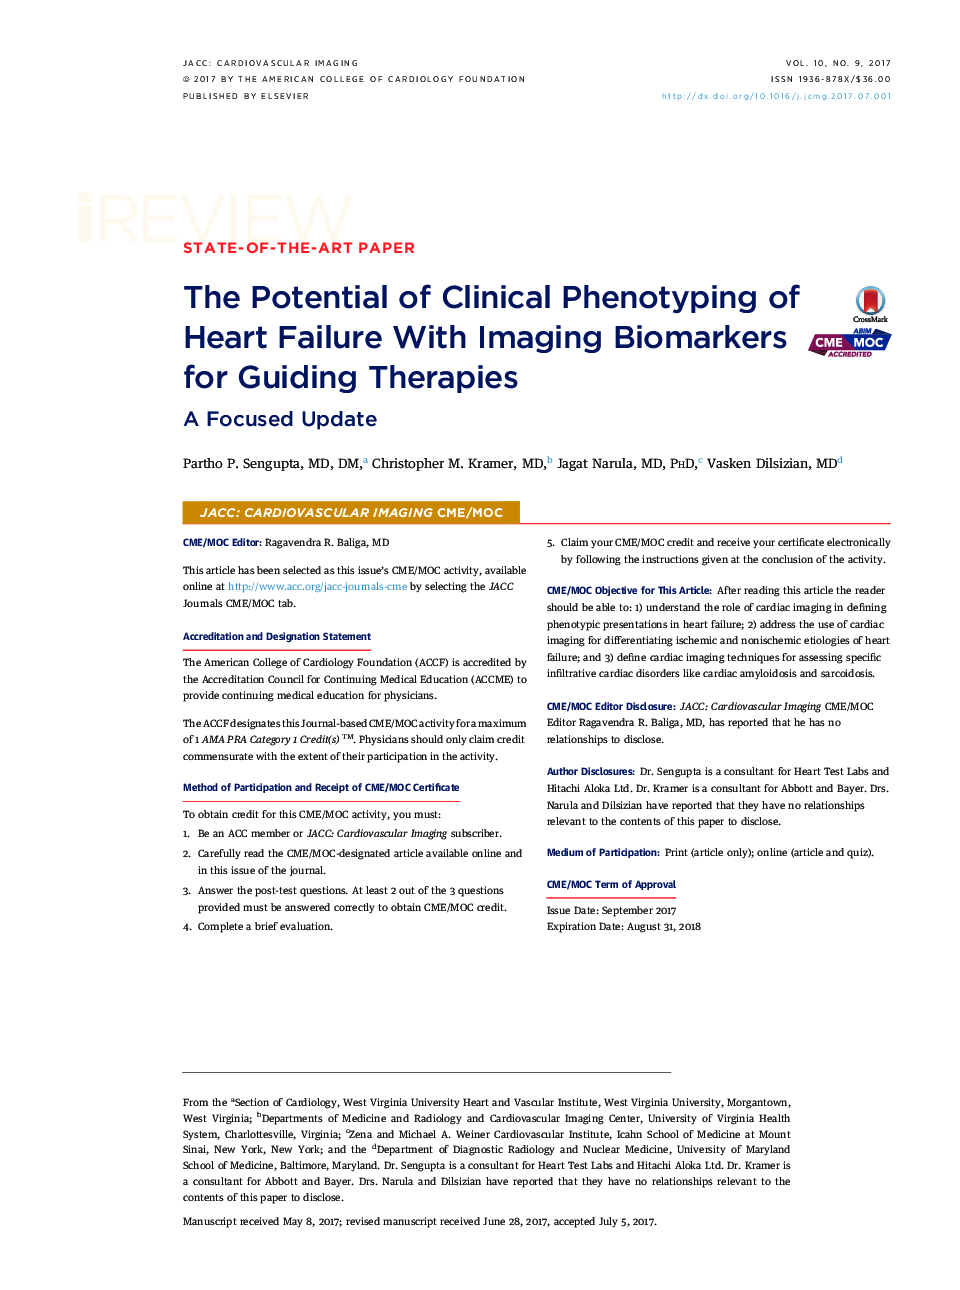 The Potential of Clinical Phenotyping of HeartÂ Failure With Imaging Biomarkers forÂ GuidingÂ Therapies